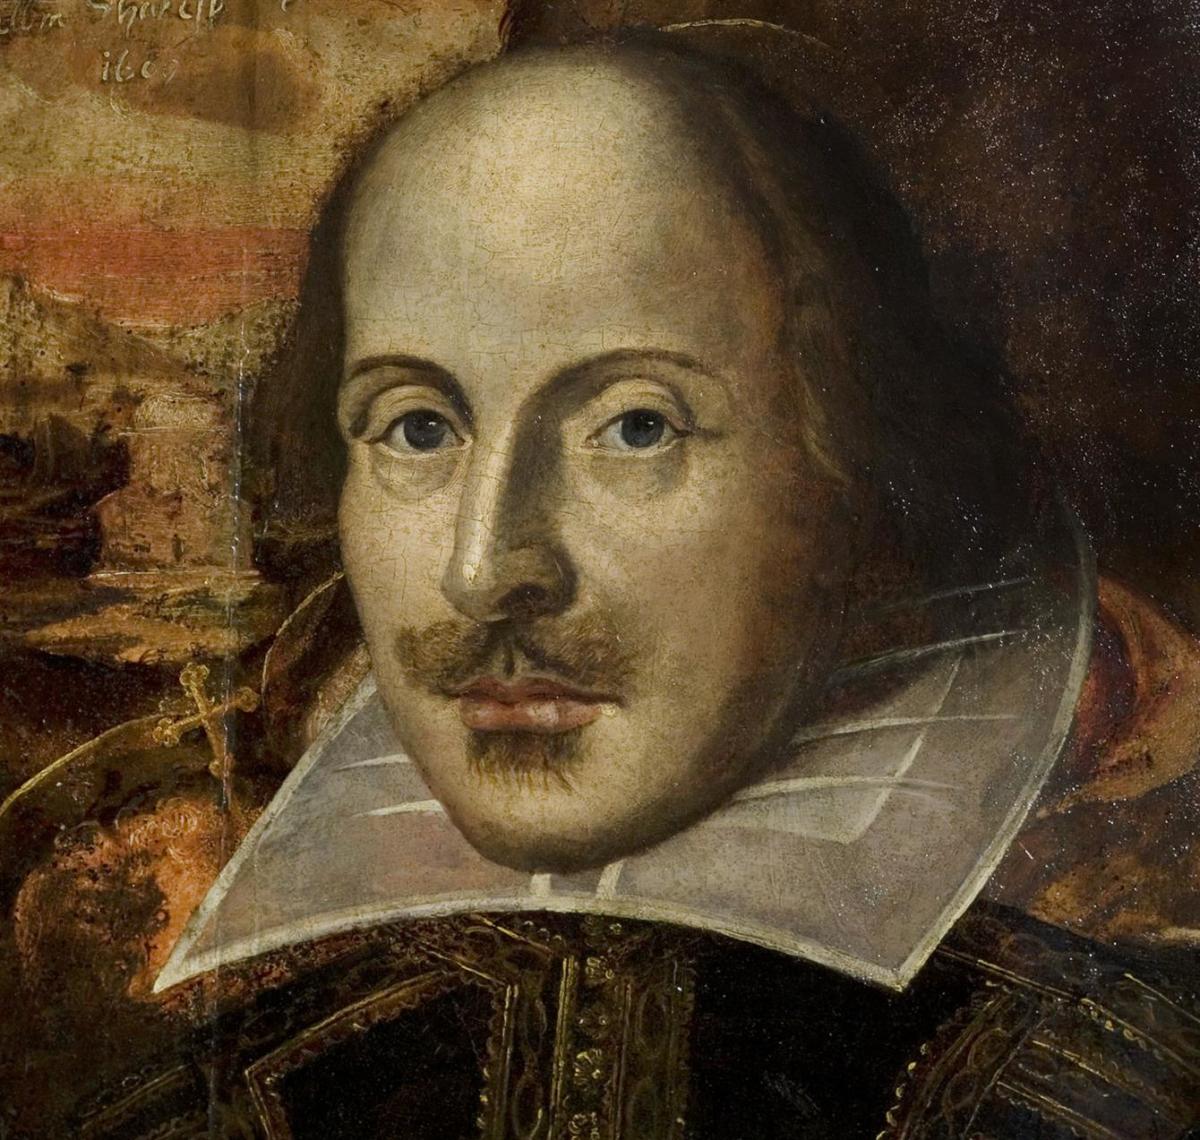 Summary and Analysis of Sonnet 4 by William Shakespeare